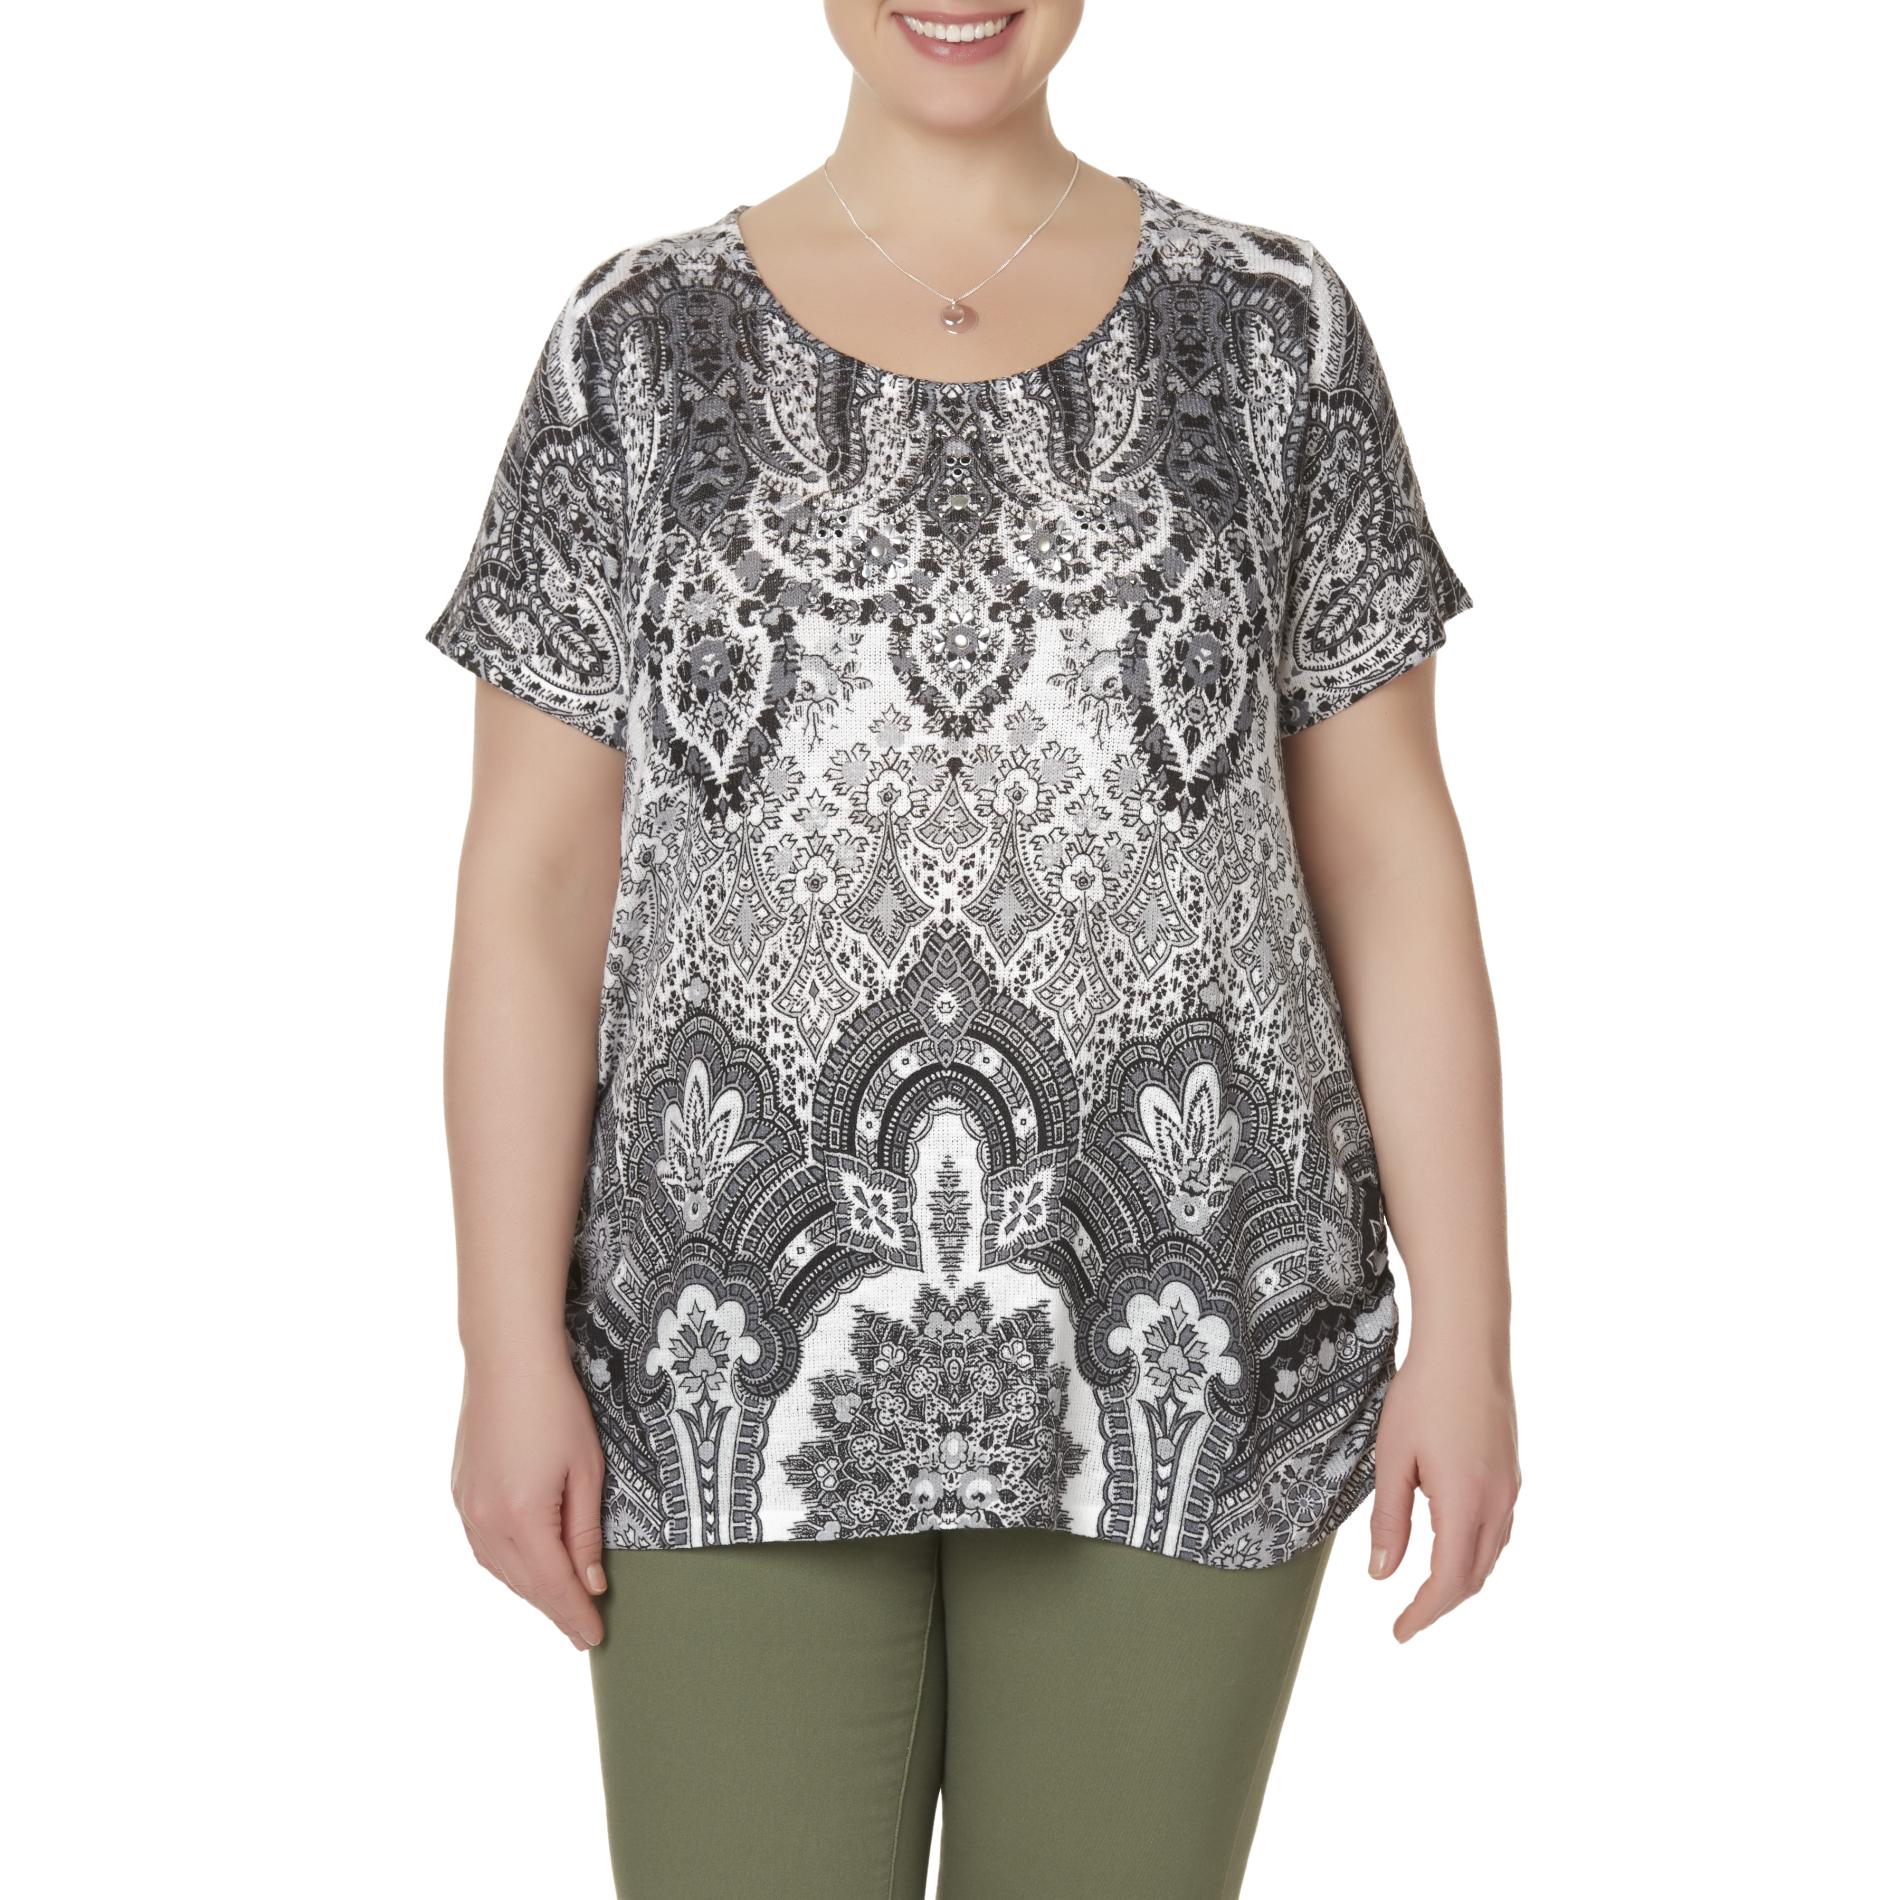 Simply Emma Women's Plus Embellished Top - Paisley & Floral